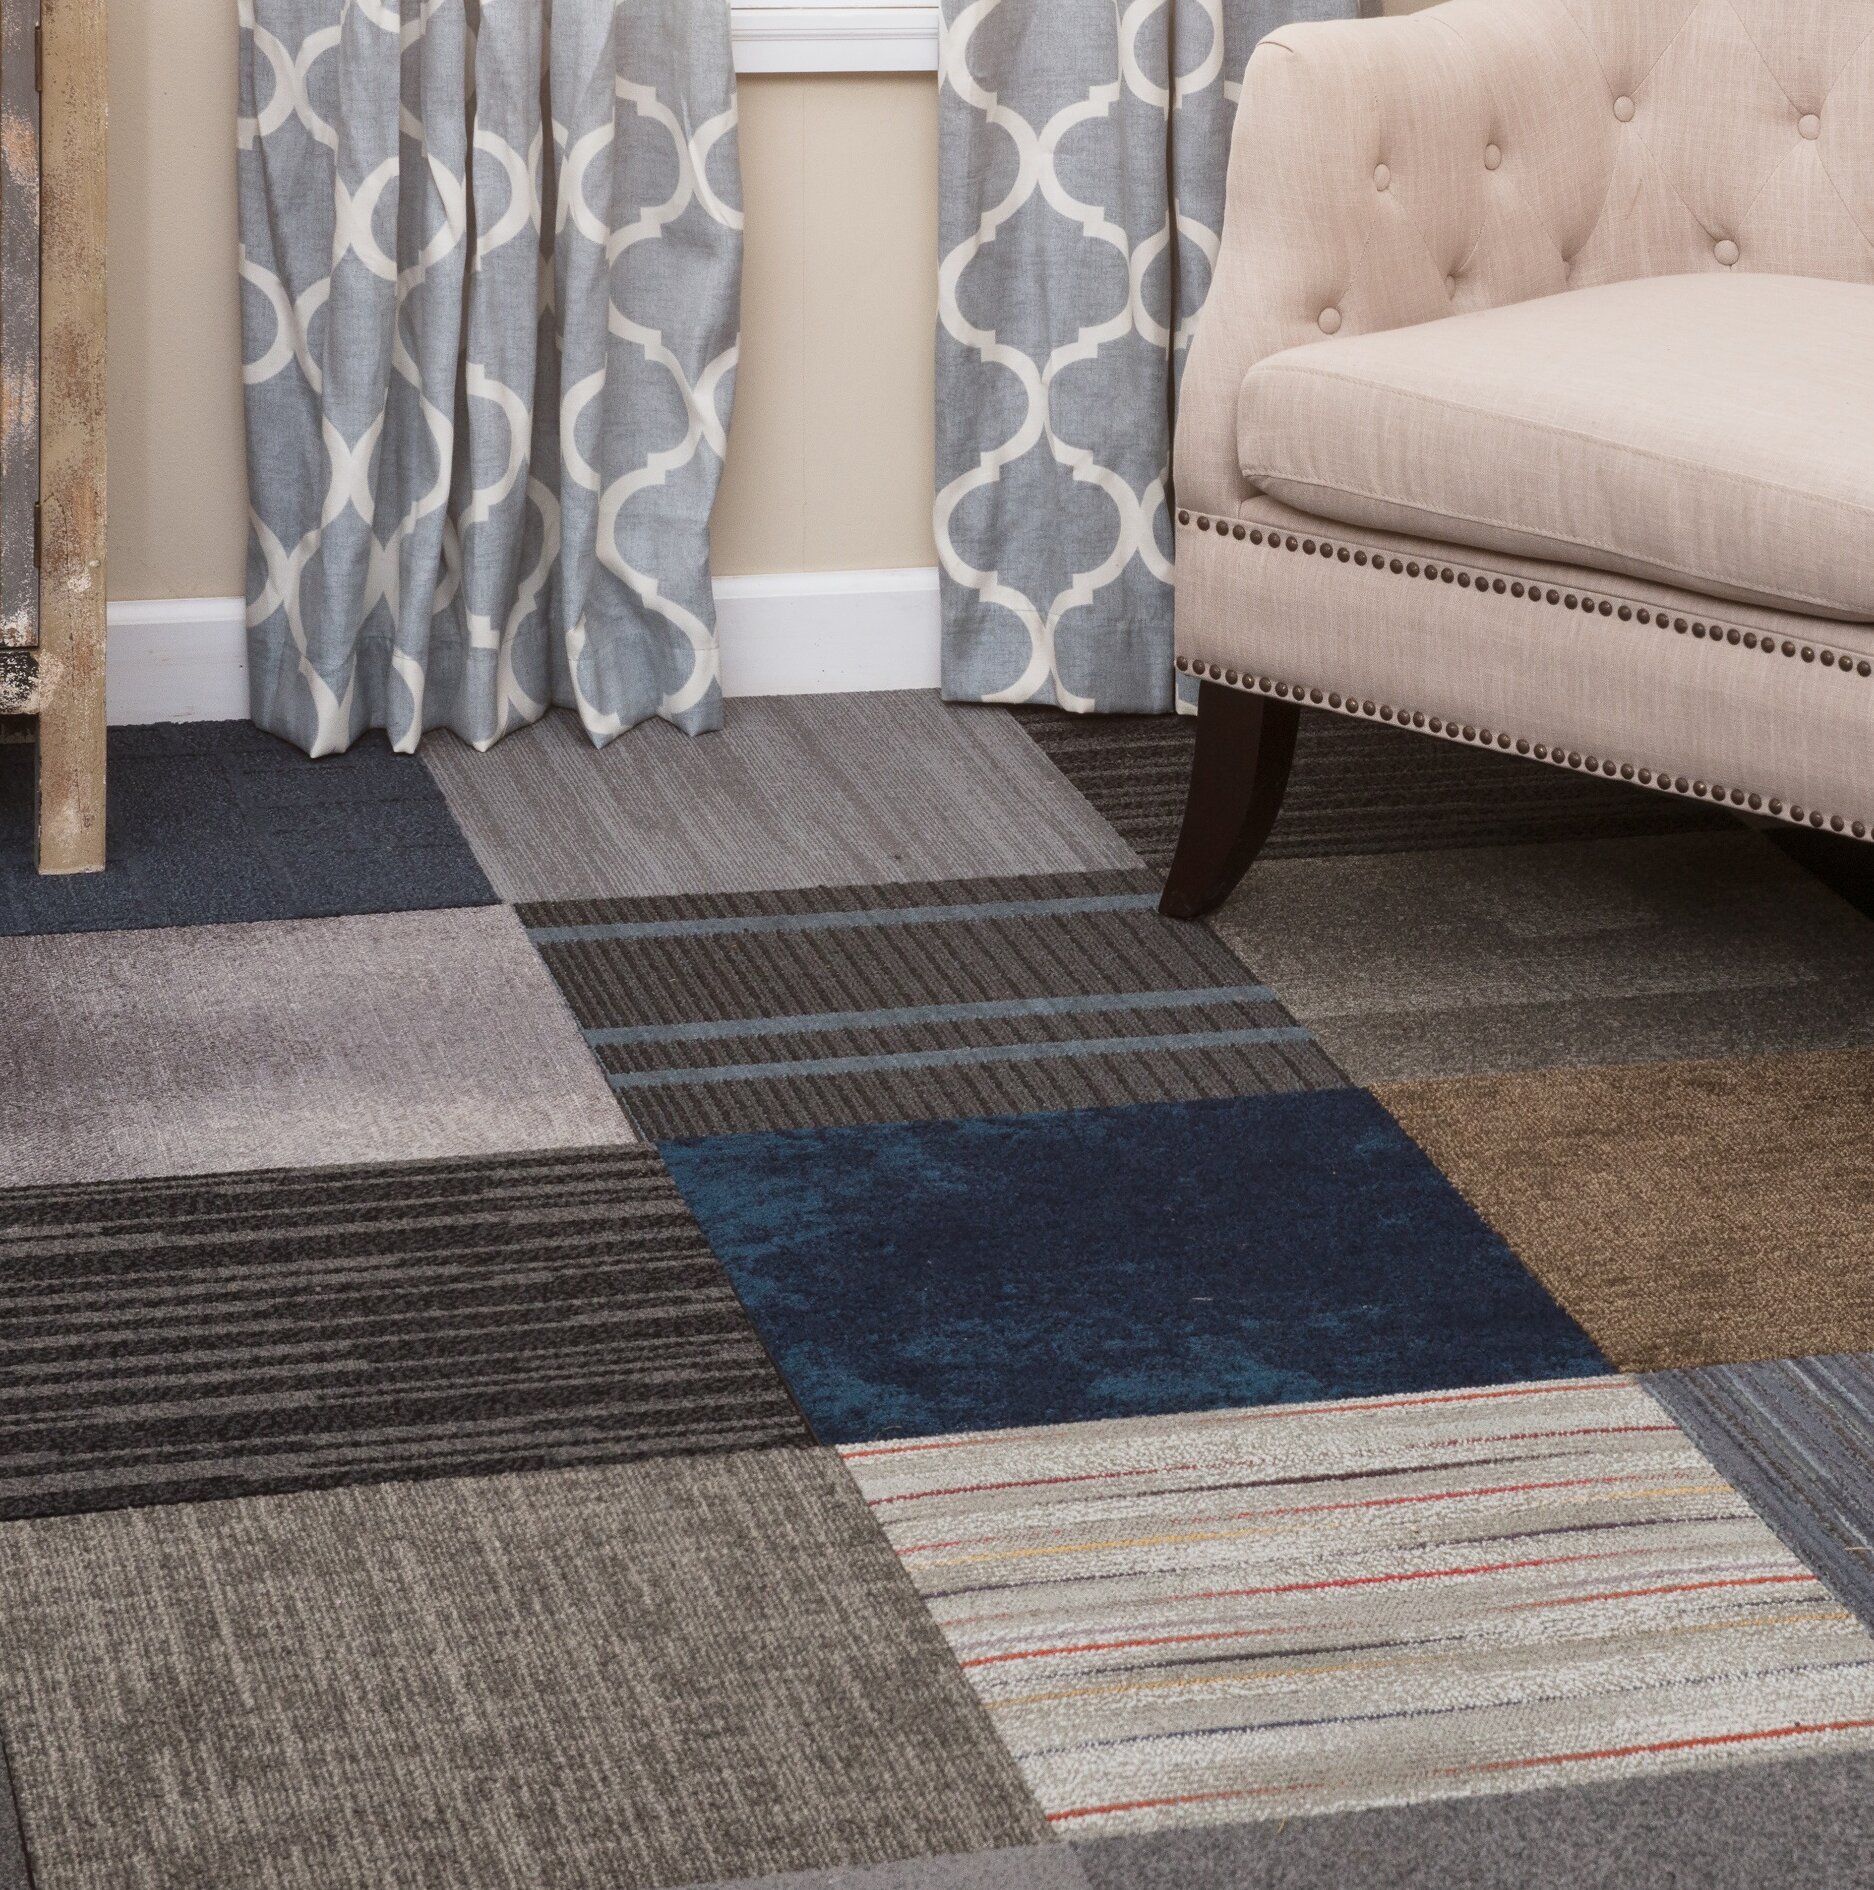 How to Choose the Best Carpet Tiles for Your Room | Wayfair